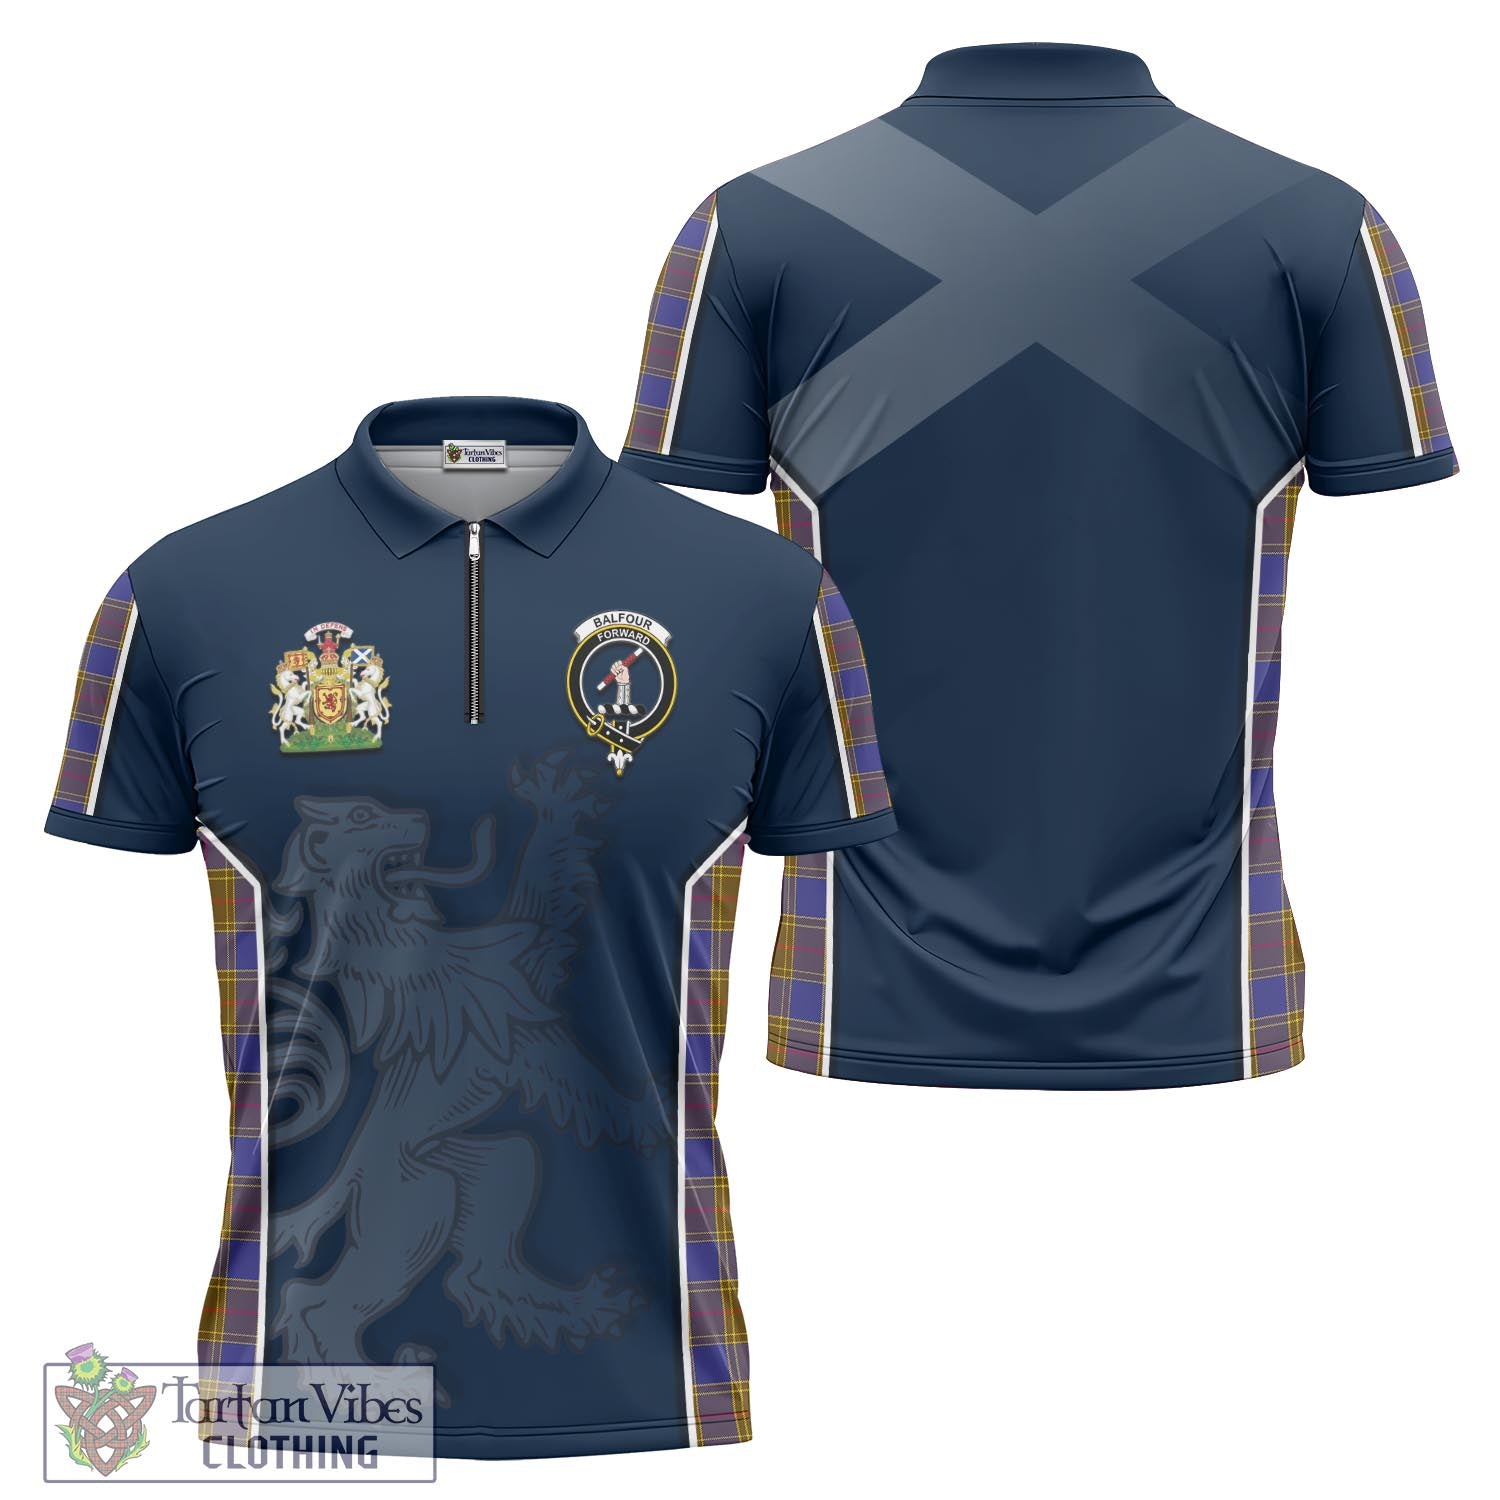 Tartan Vibes Clothing Balfour Modern Tartan Zipper Polo Shirt with Family Crest and Lion Rampant Vibes Sport Style